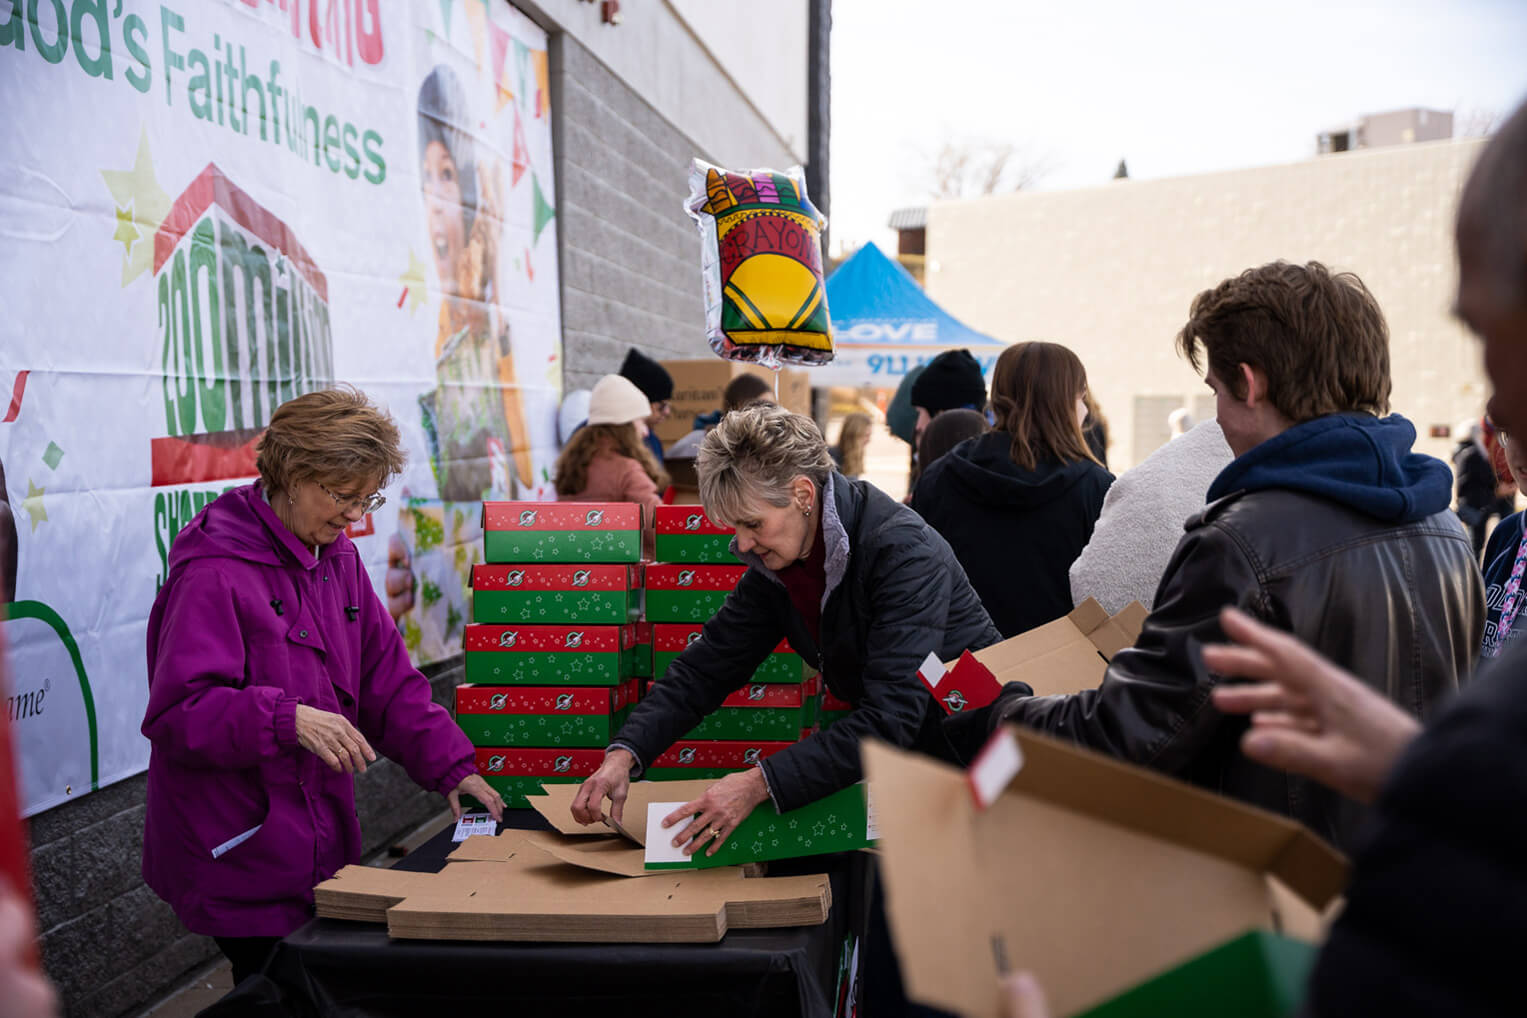 Busy packing shoeboxes on Nov. 12 in Colorado.